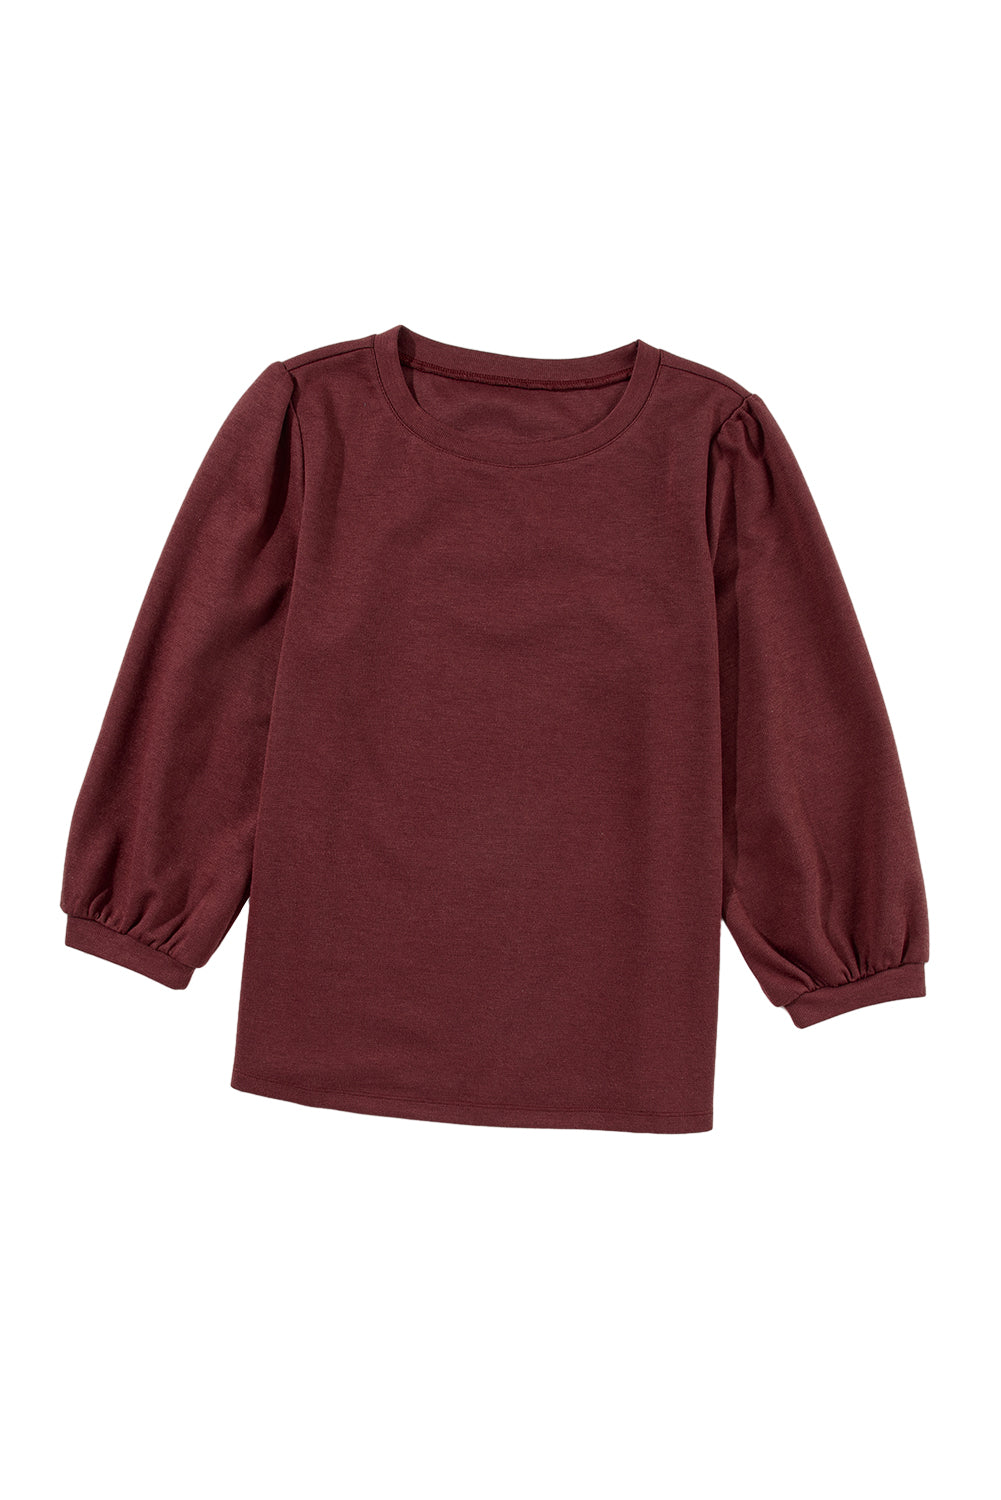 Red Dahlia Solid Color 3/4 Sleeve Round Neck Top